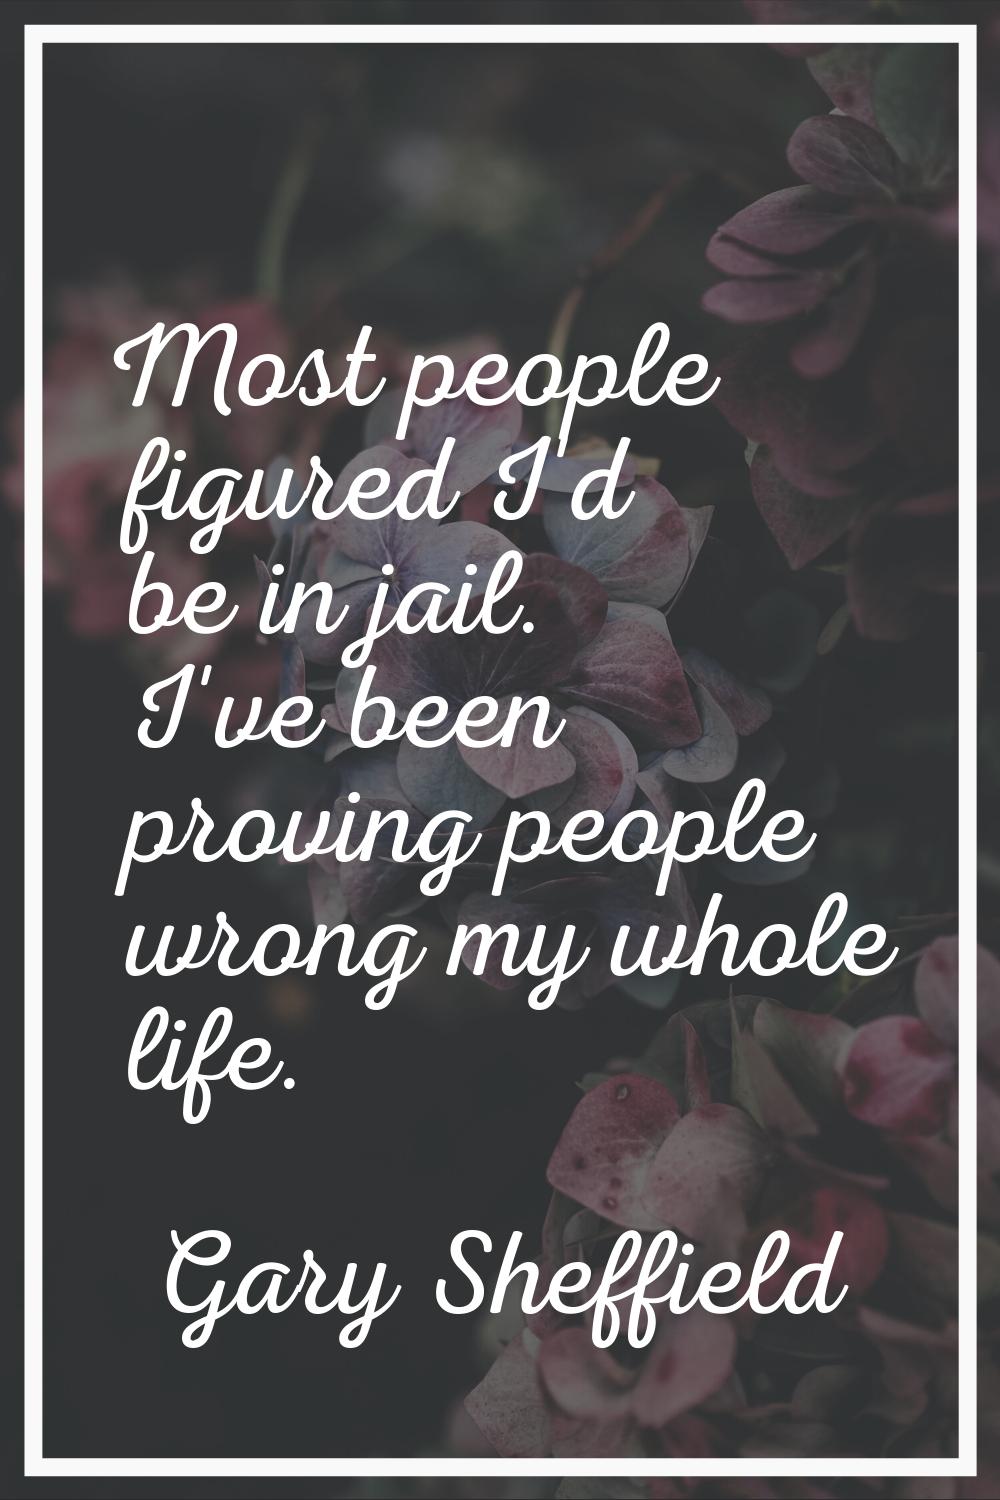 Most people figured I'd be in jail. I've been proving people wrong my whole life.